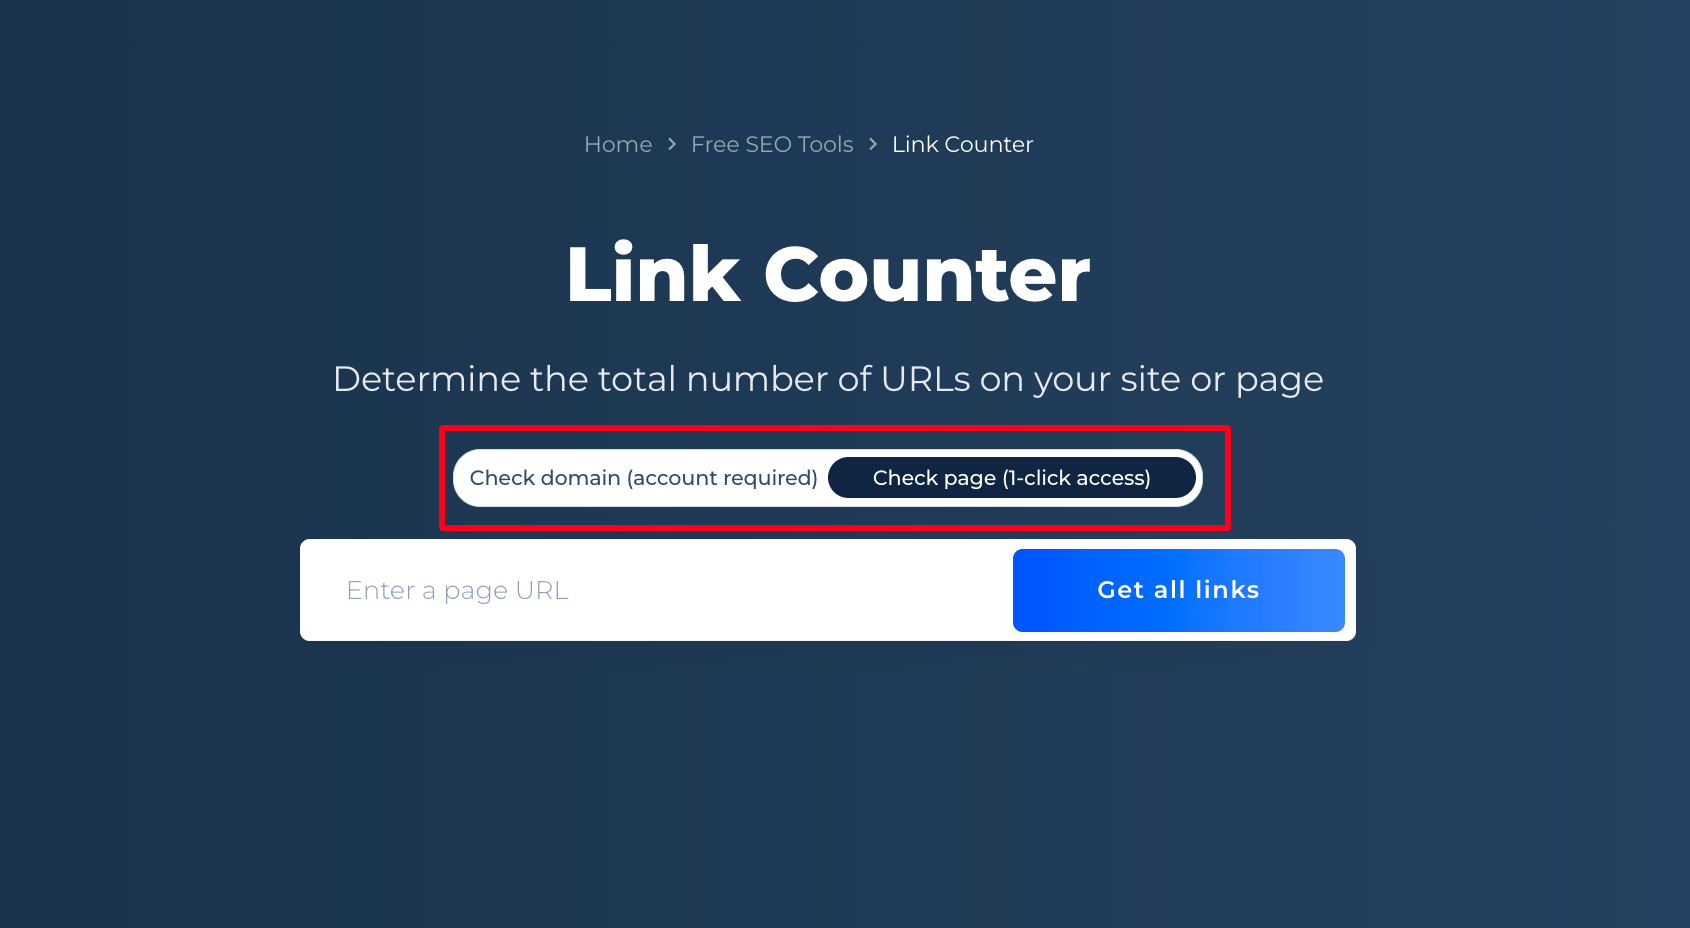 Link Counter